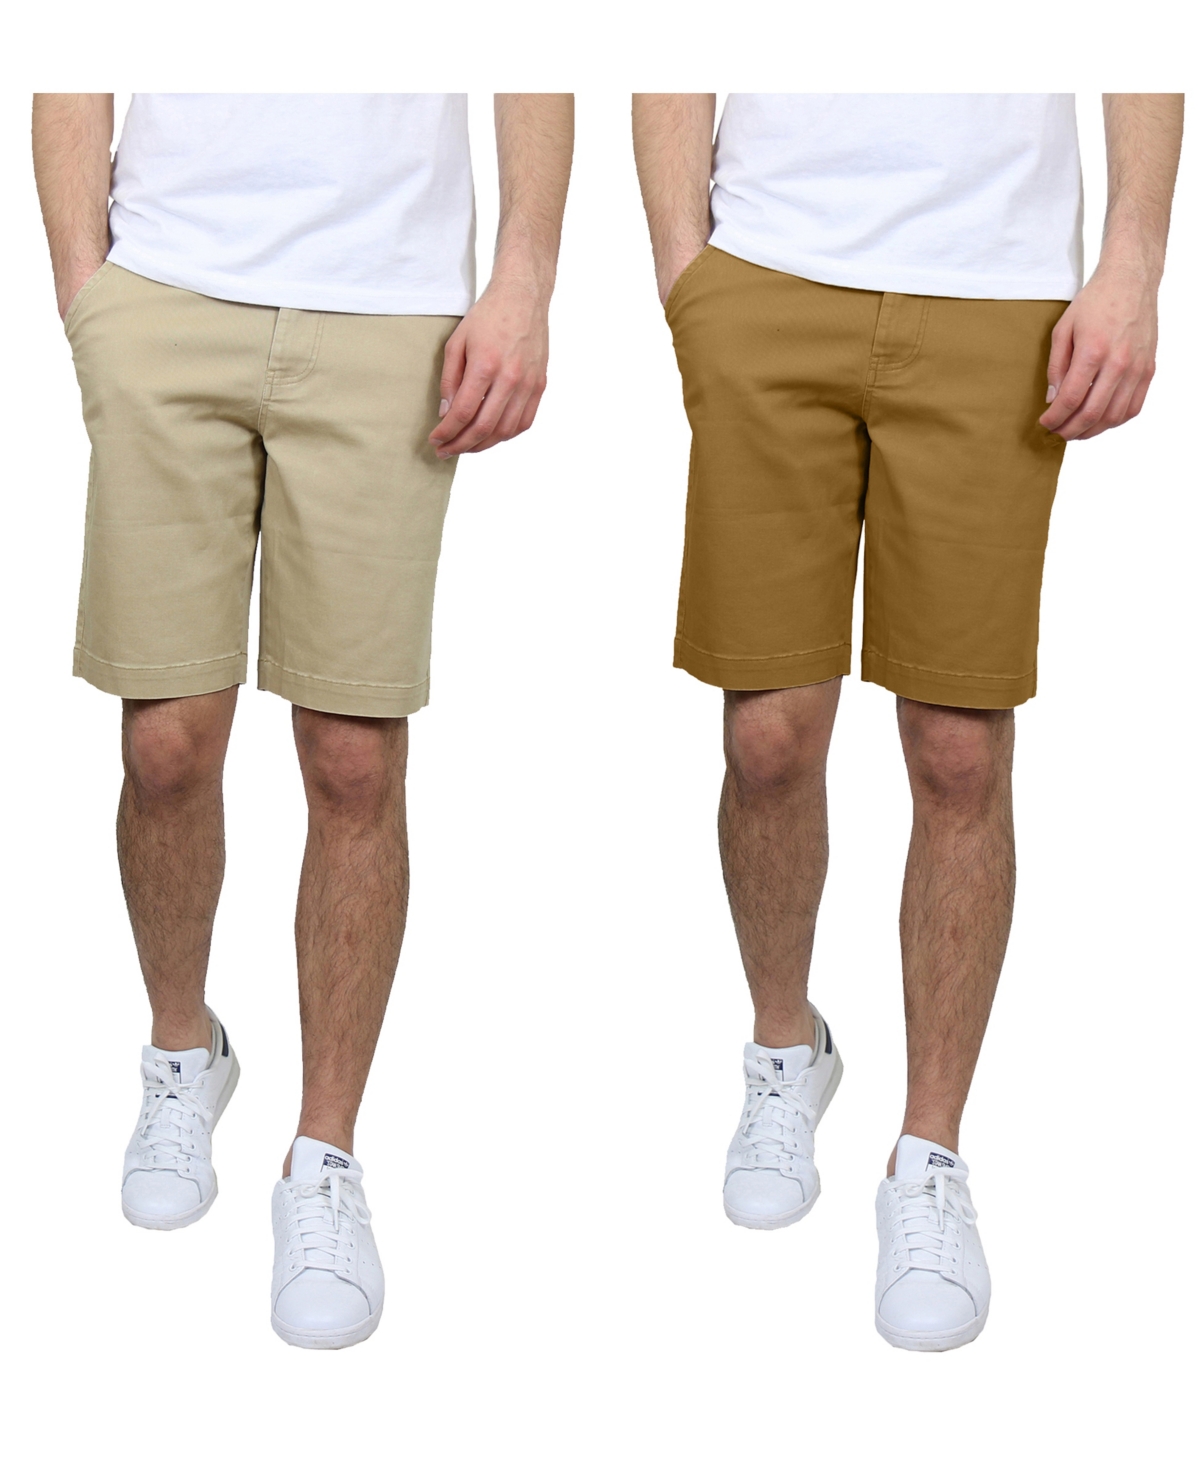 Men's 5 Pocket Flat Front Slim Fit Stretch Chino Shorts, Pack of 2 - Khaki, Timber